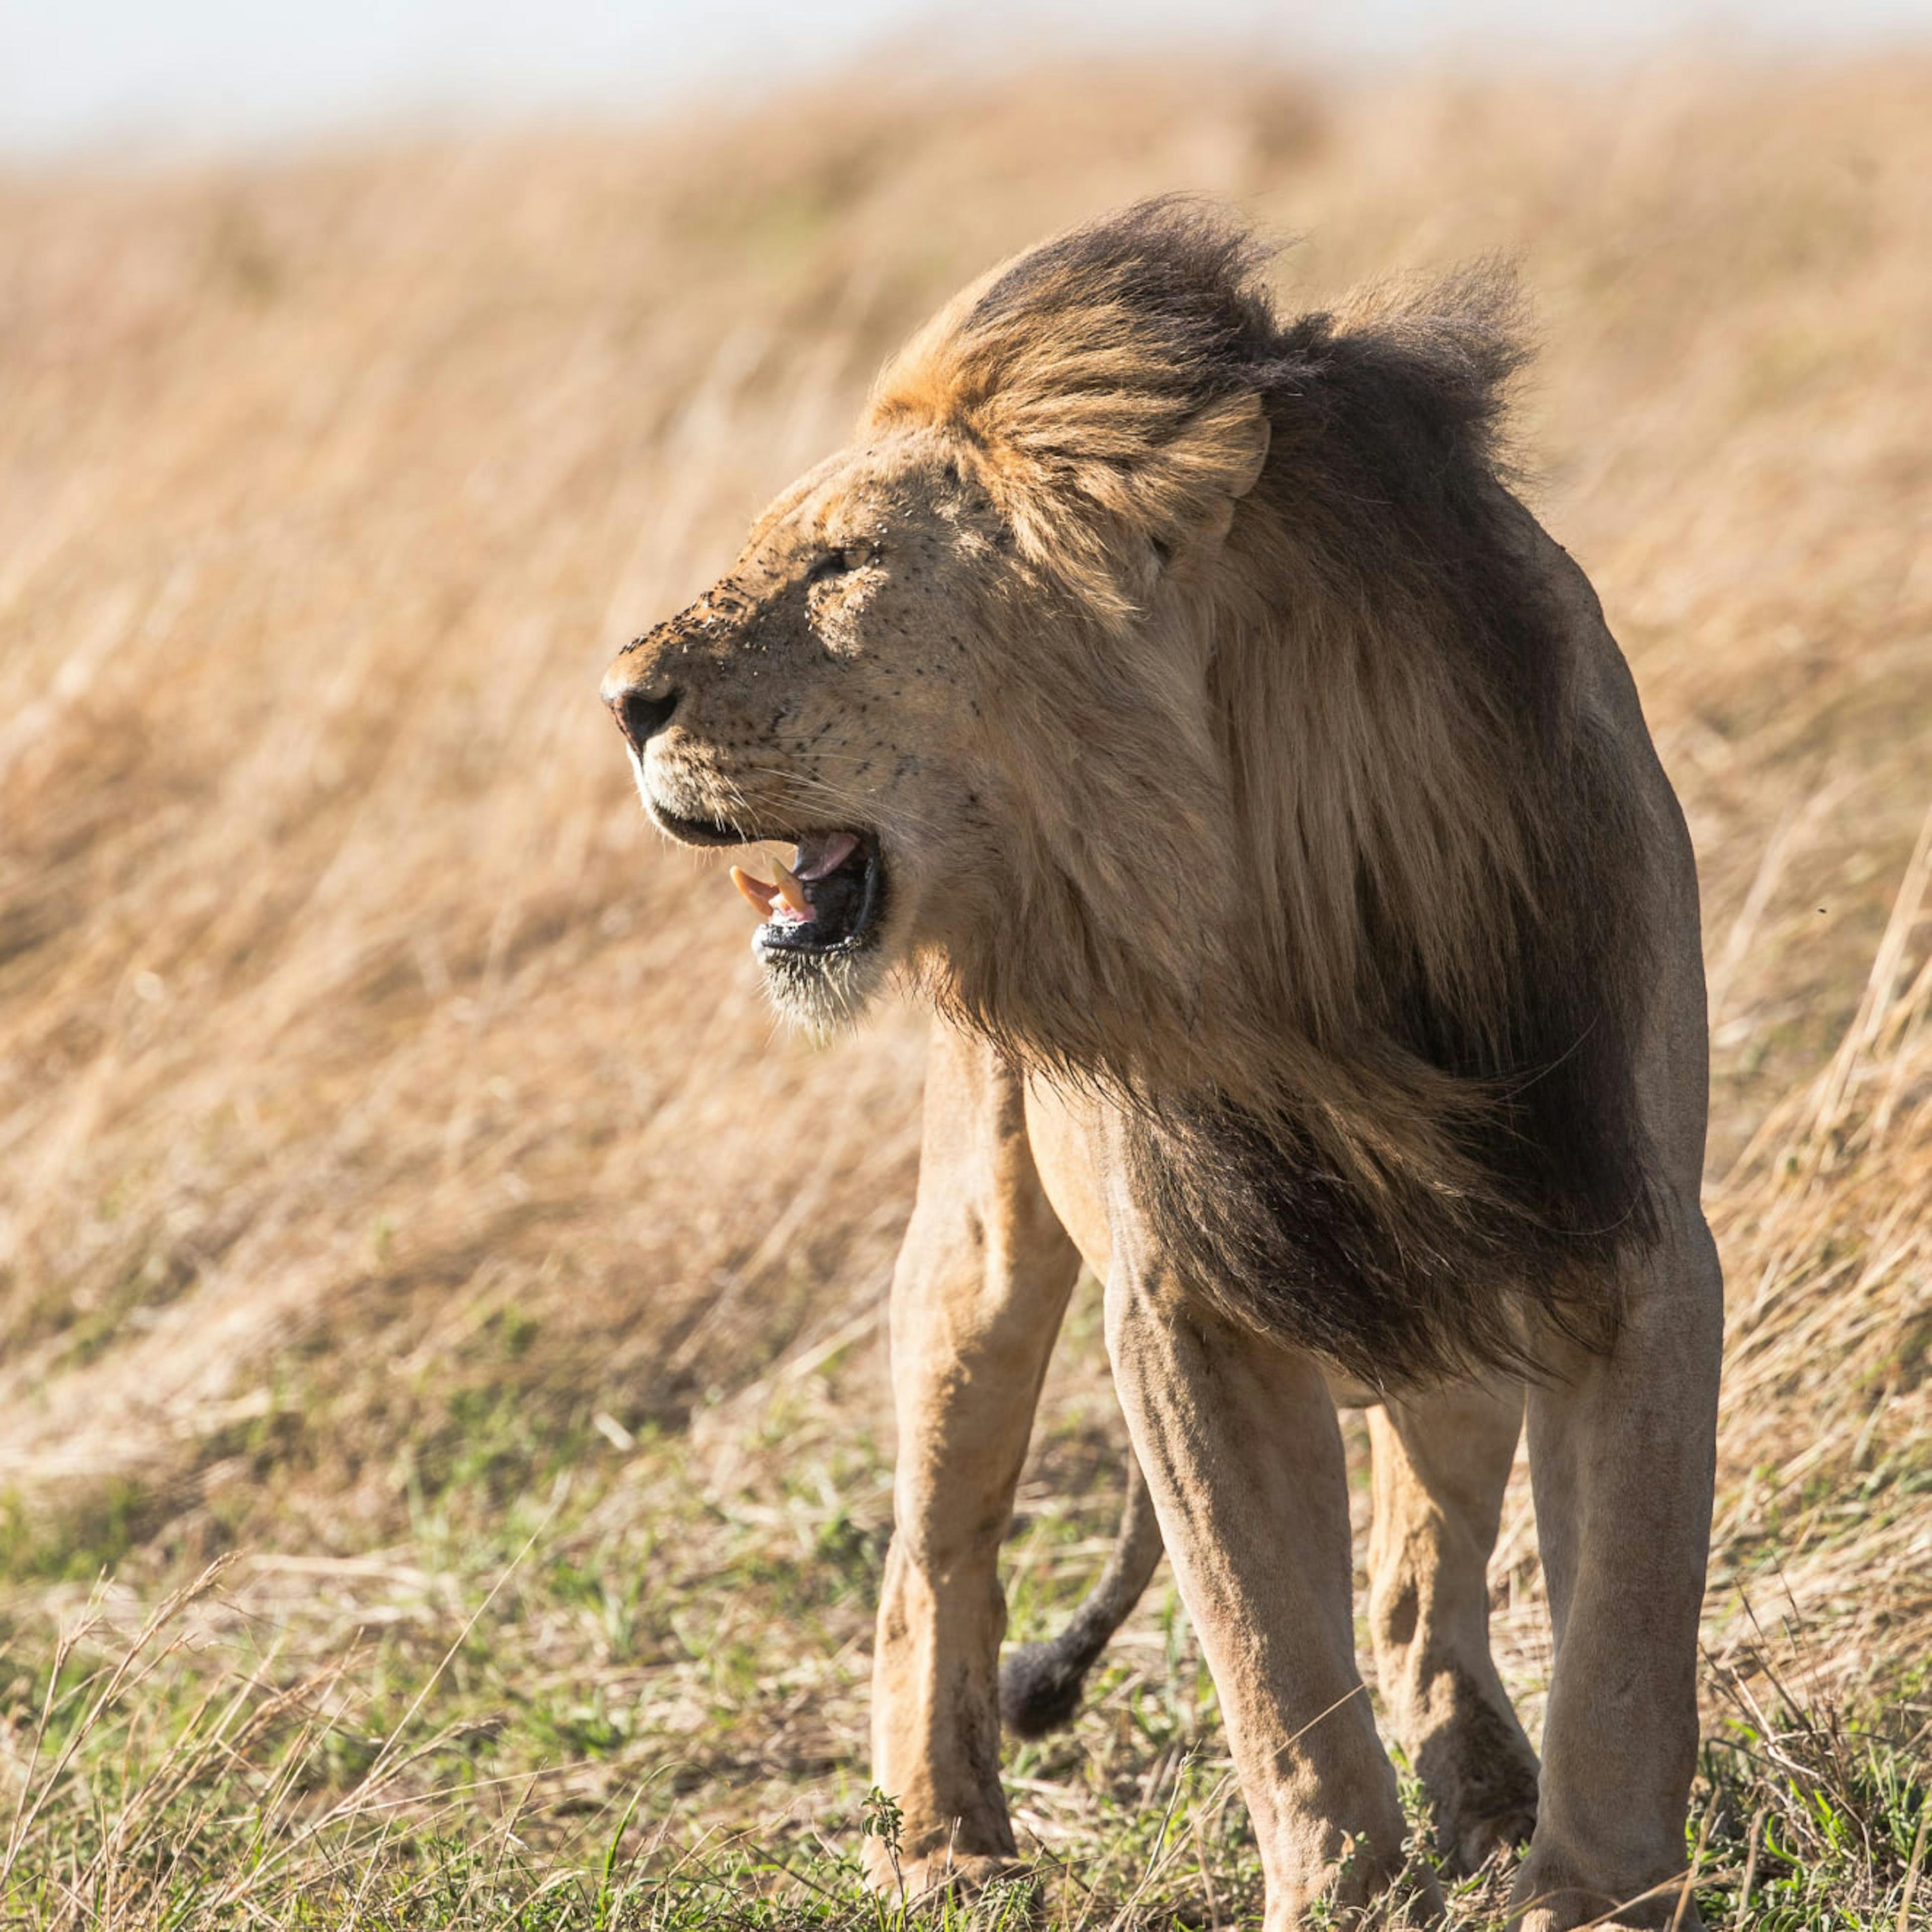 Lions are not actually just wandering around in most African nations.